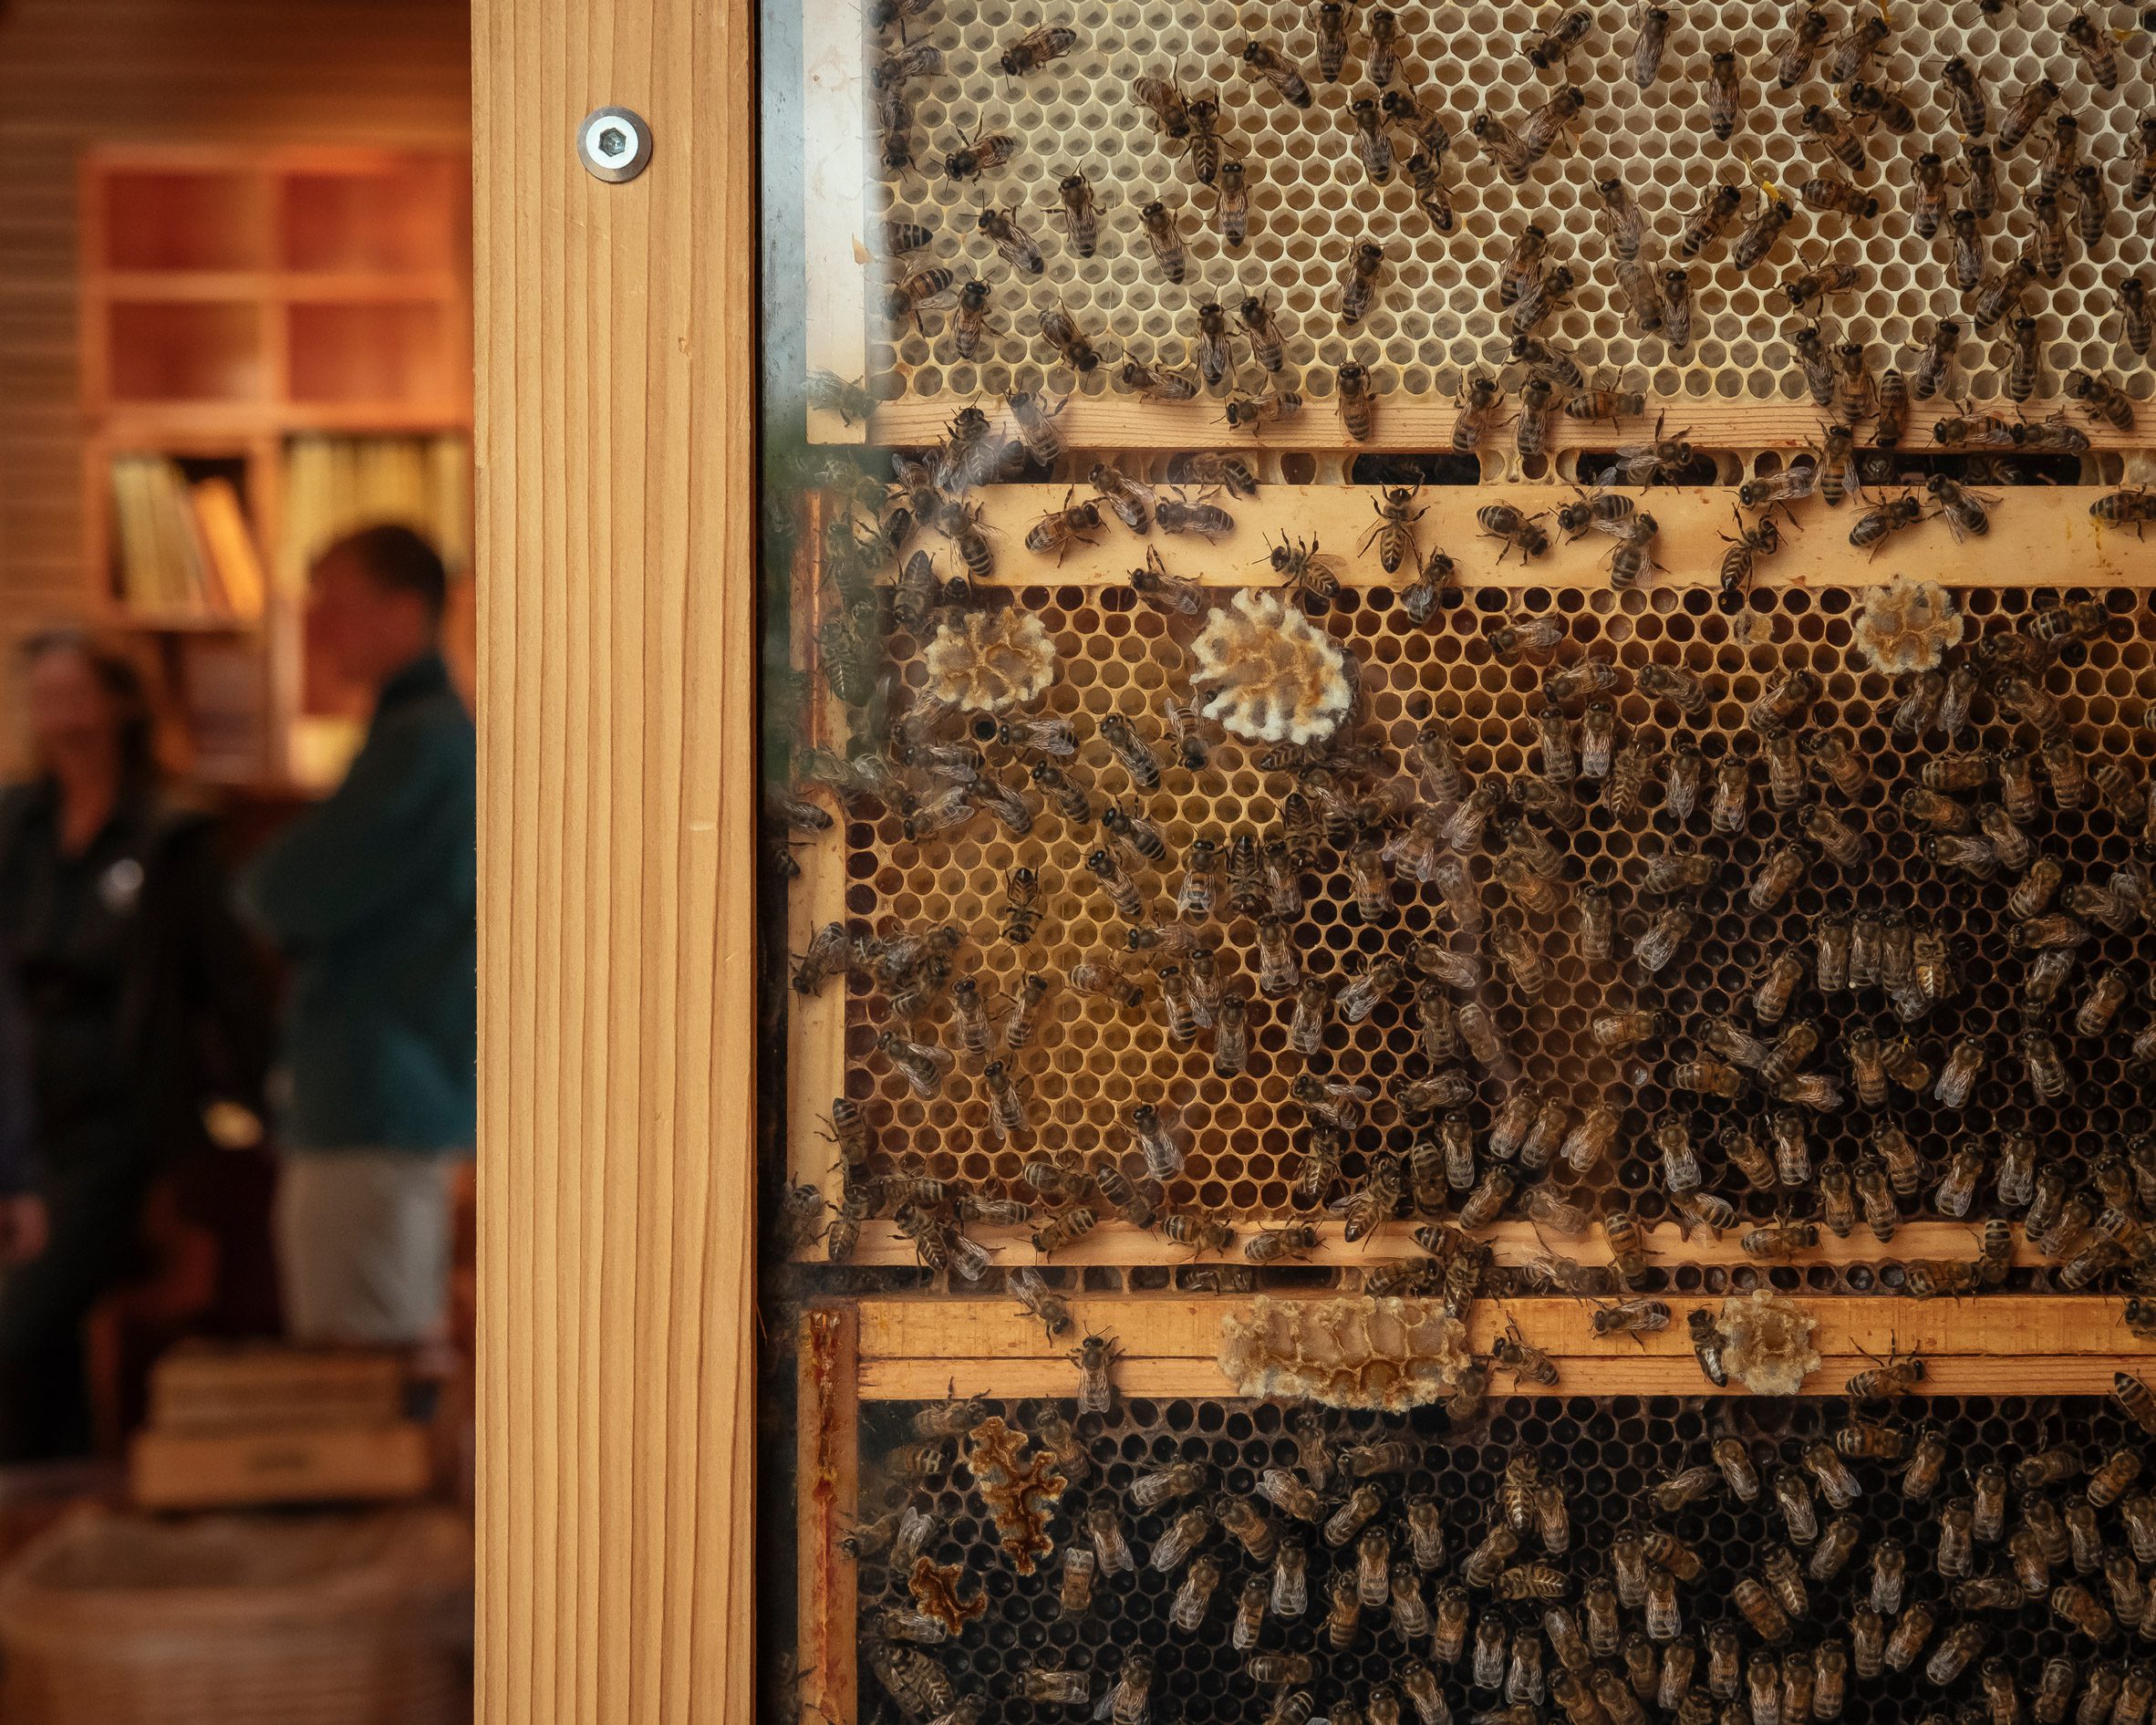 Bees in The Beezantium by Invisible Studio at The Newt in Somerset